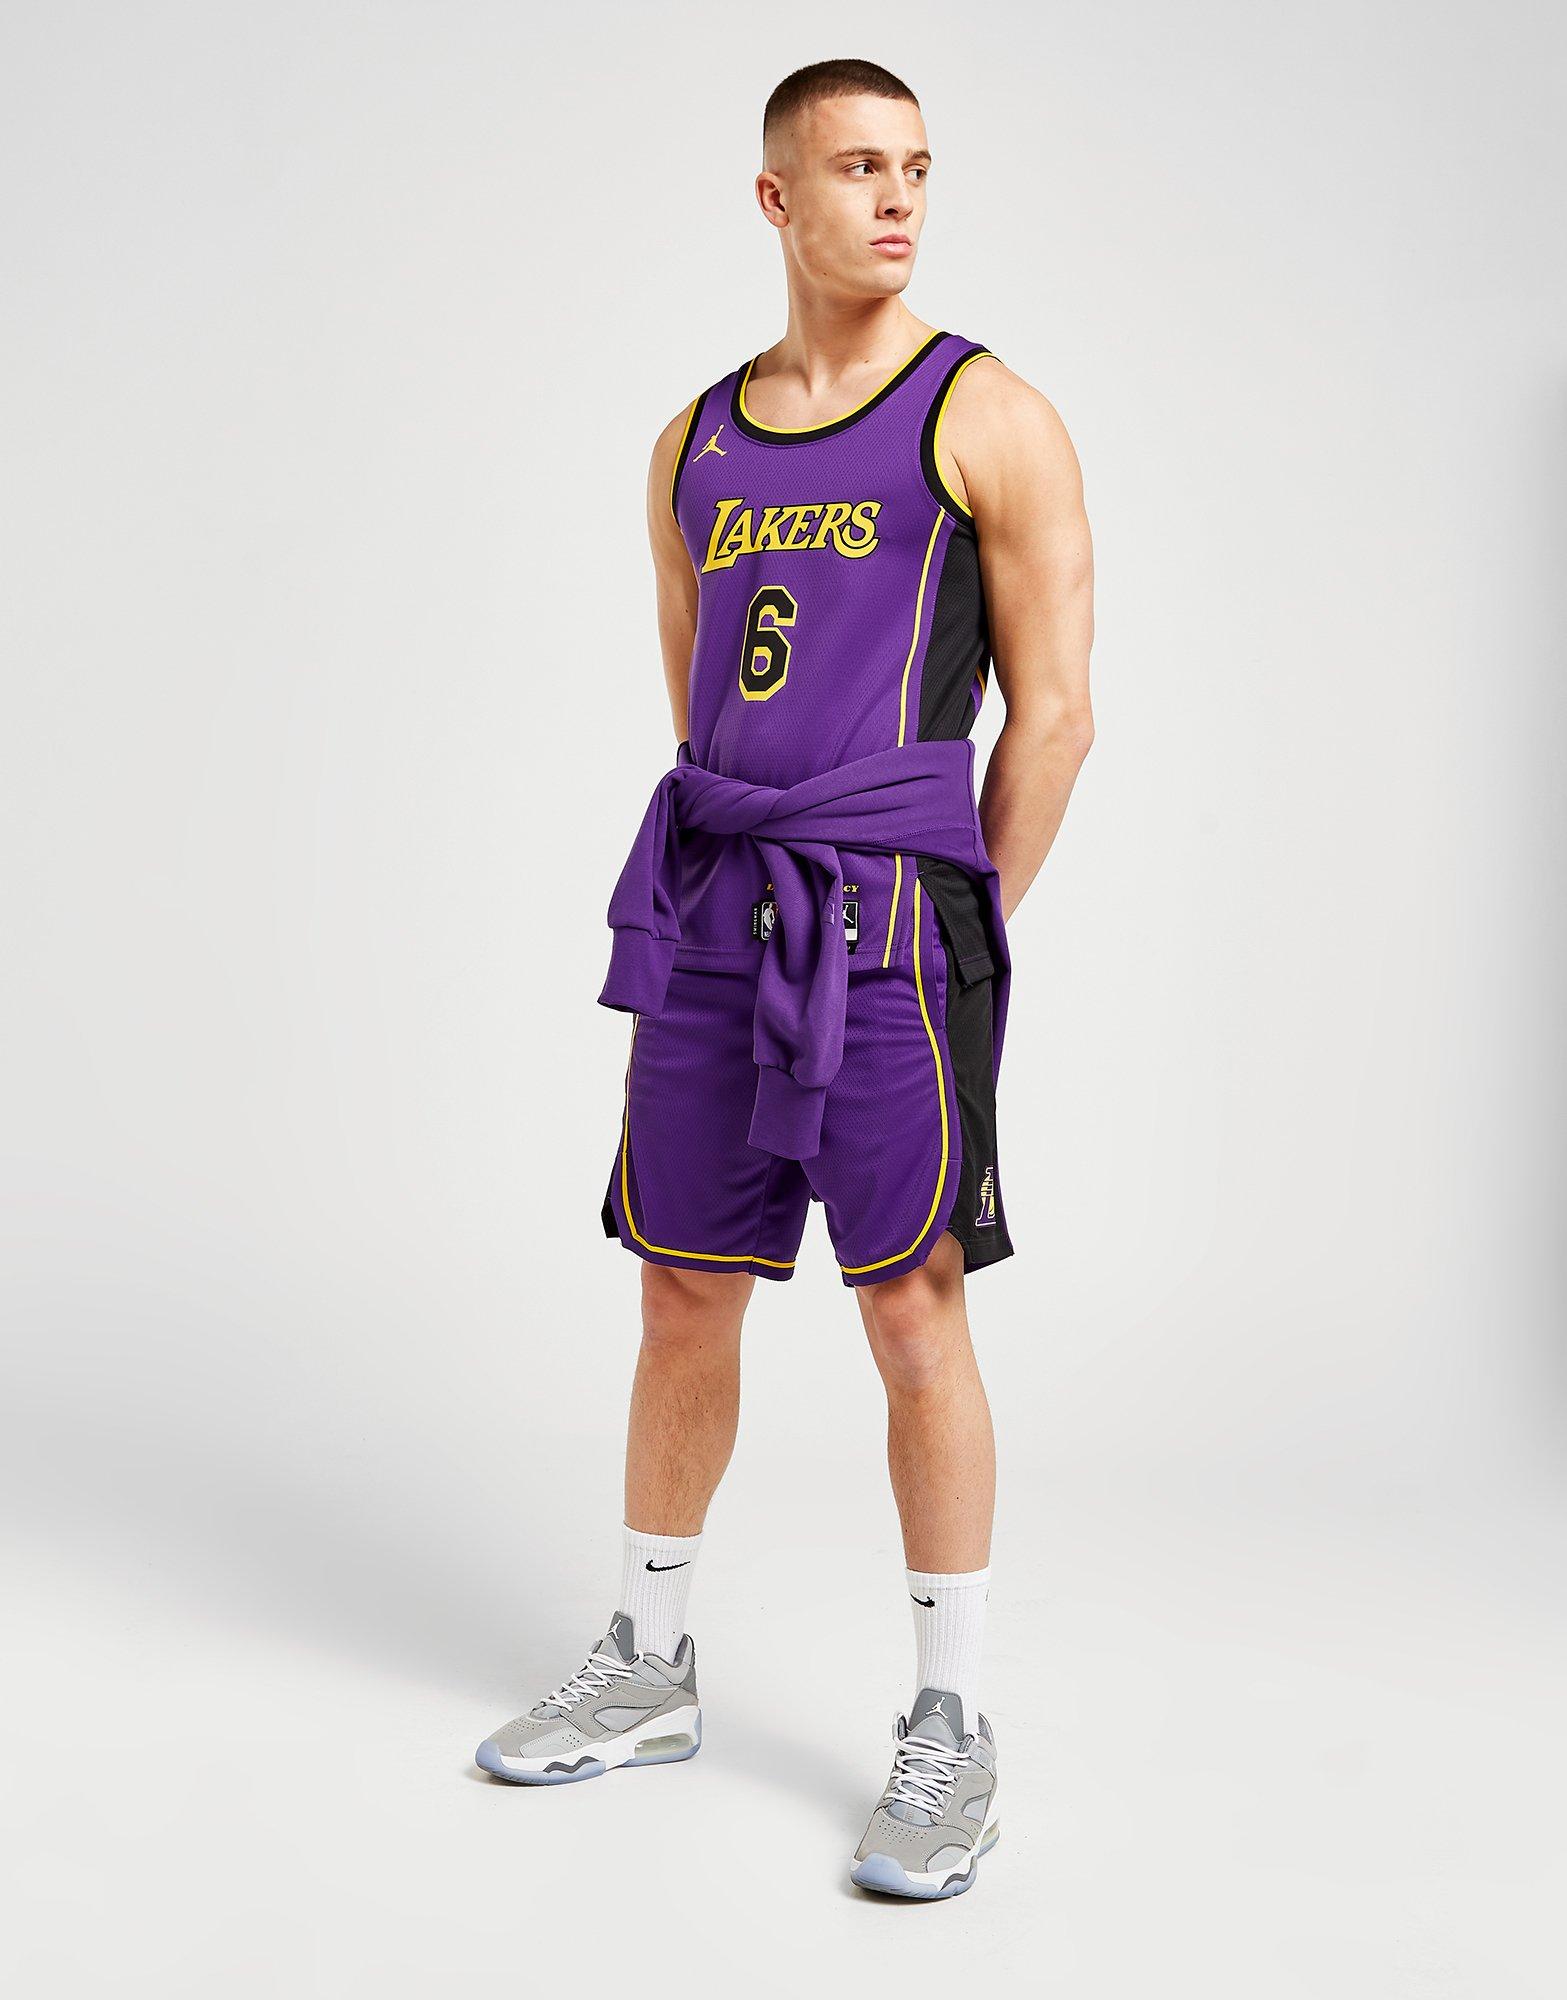 Boys Los Angeles Lakers Gold New Replica Basketball Shorts on Sale